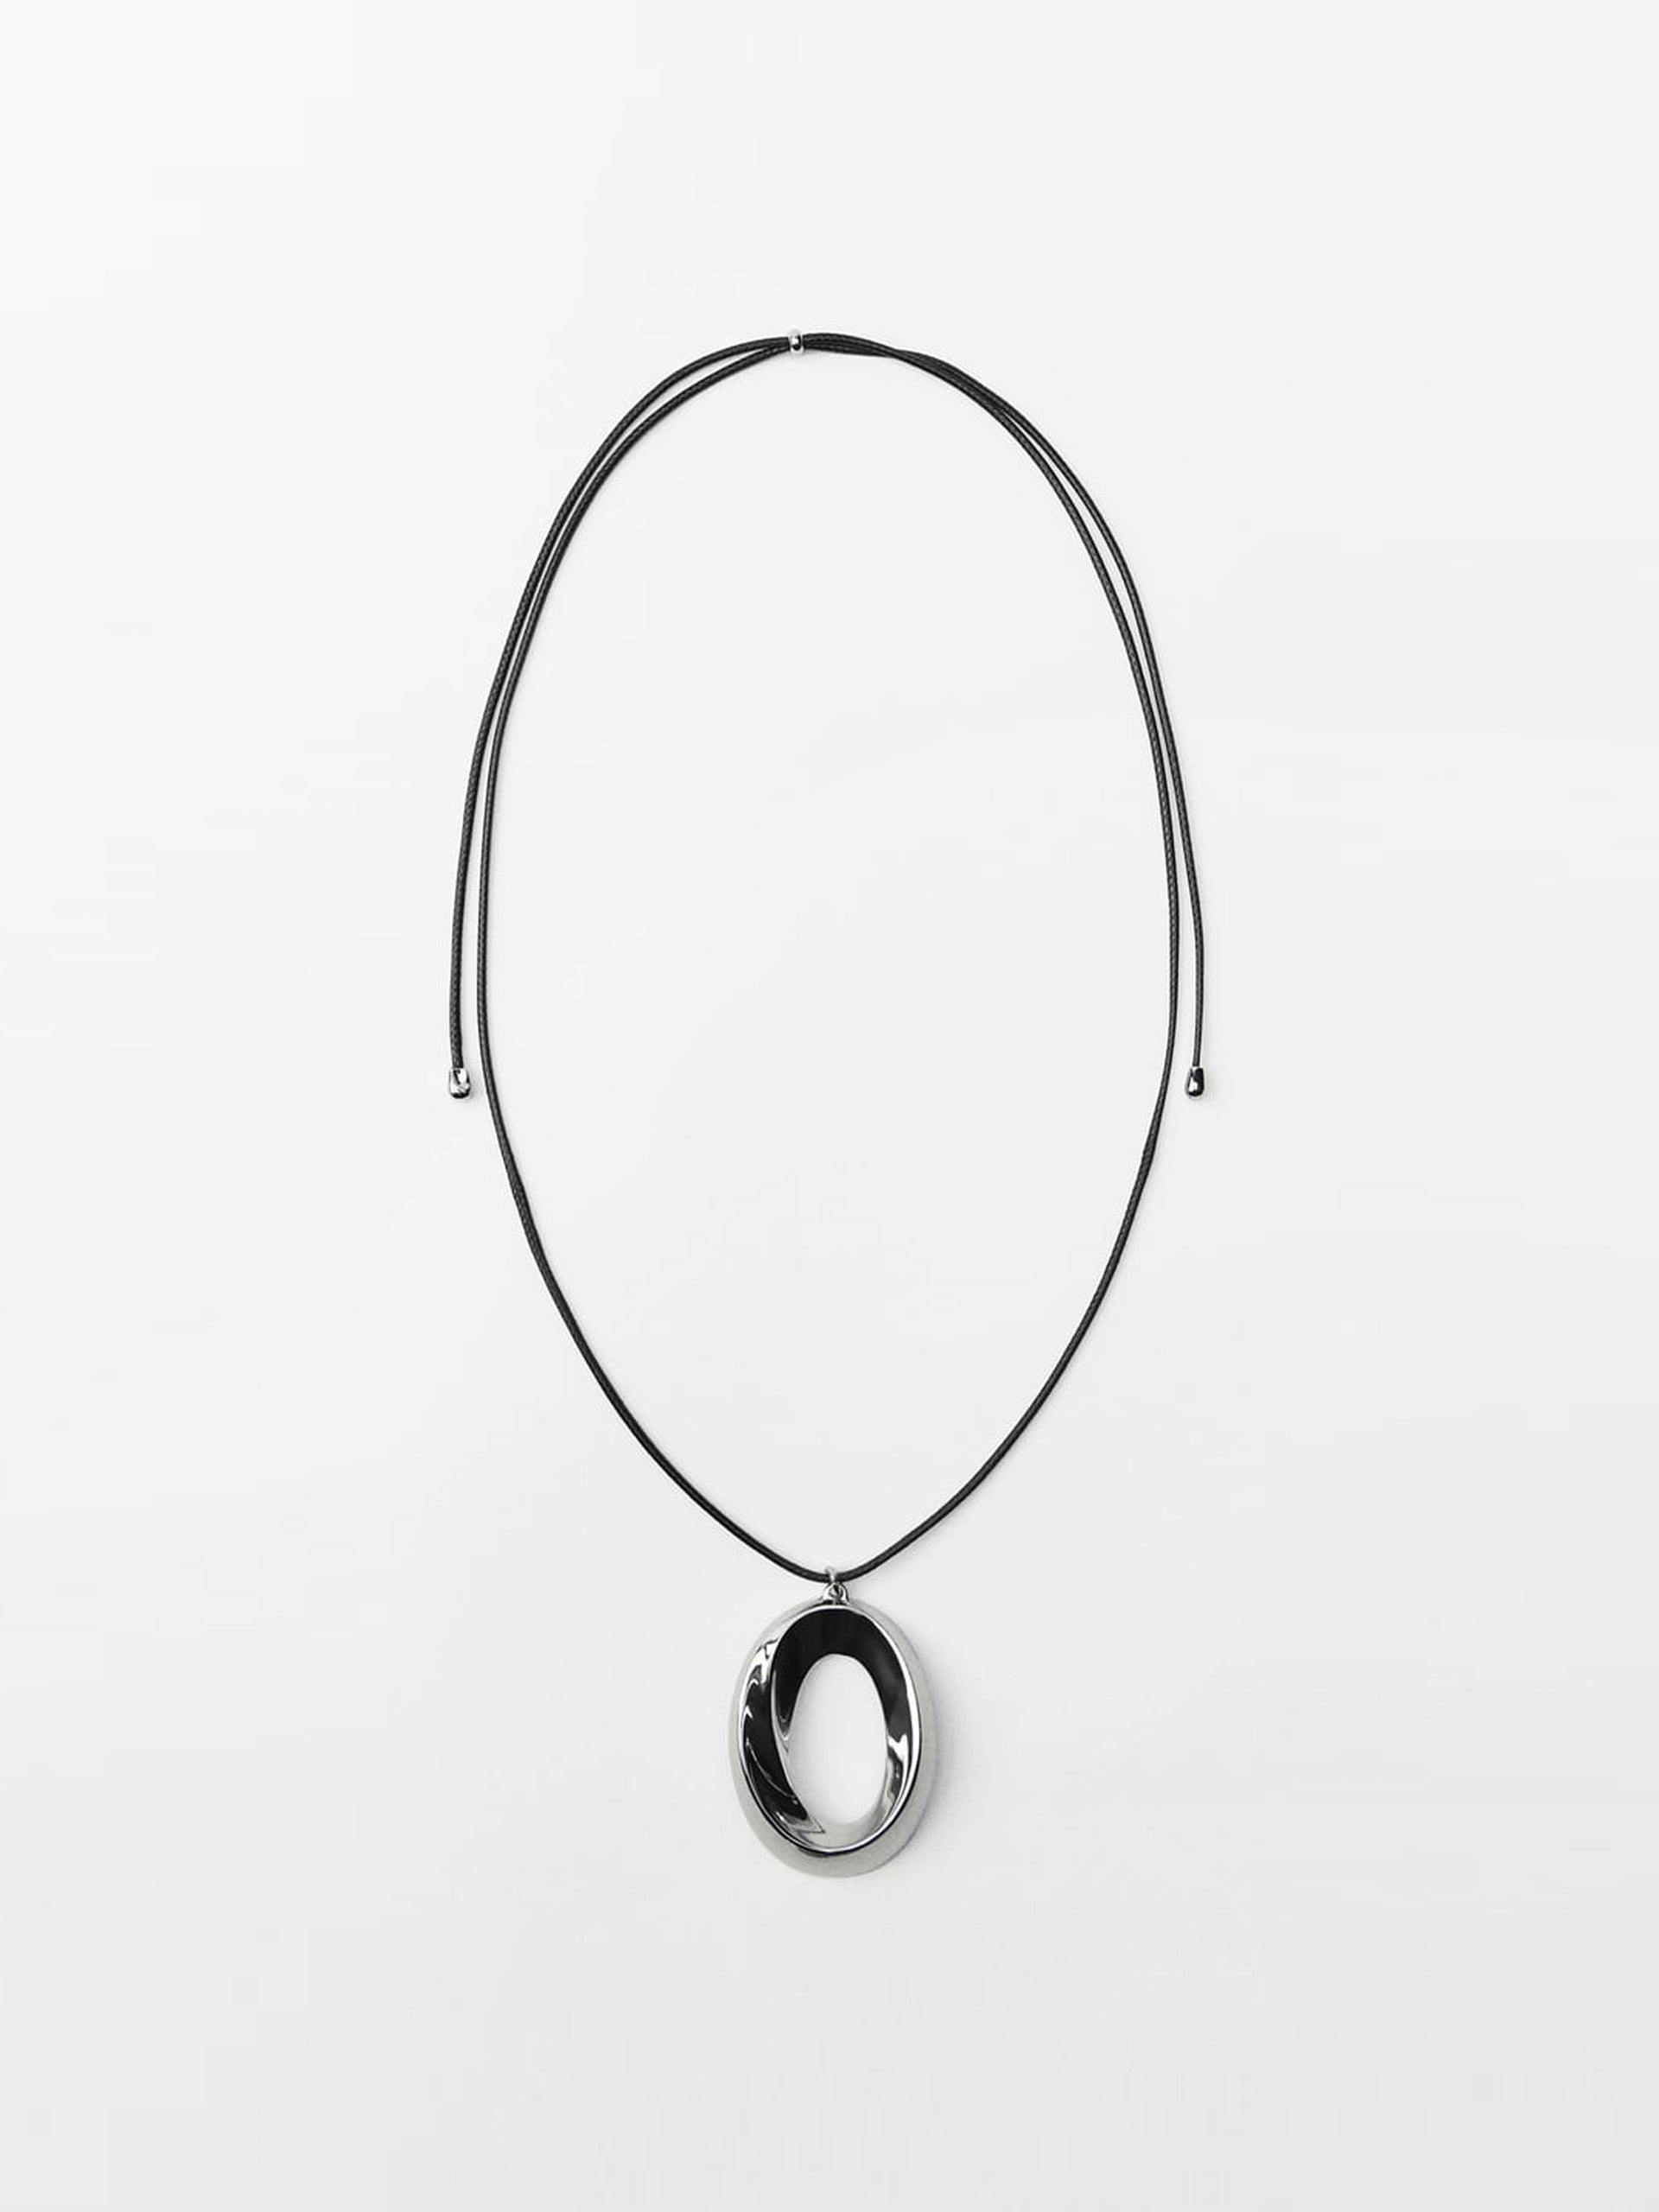 Cord necklace with circular pendant